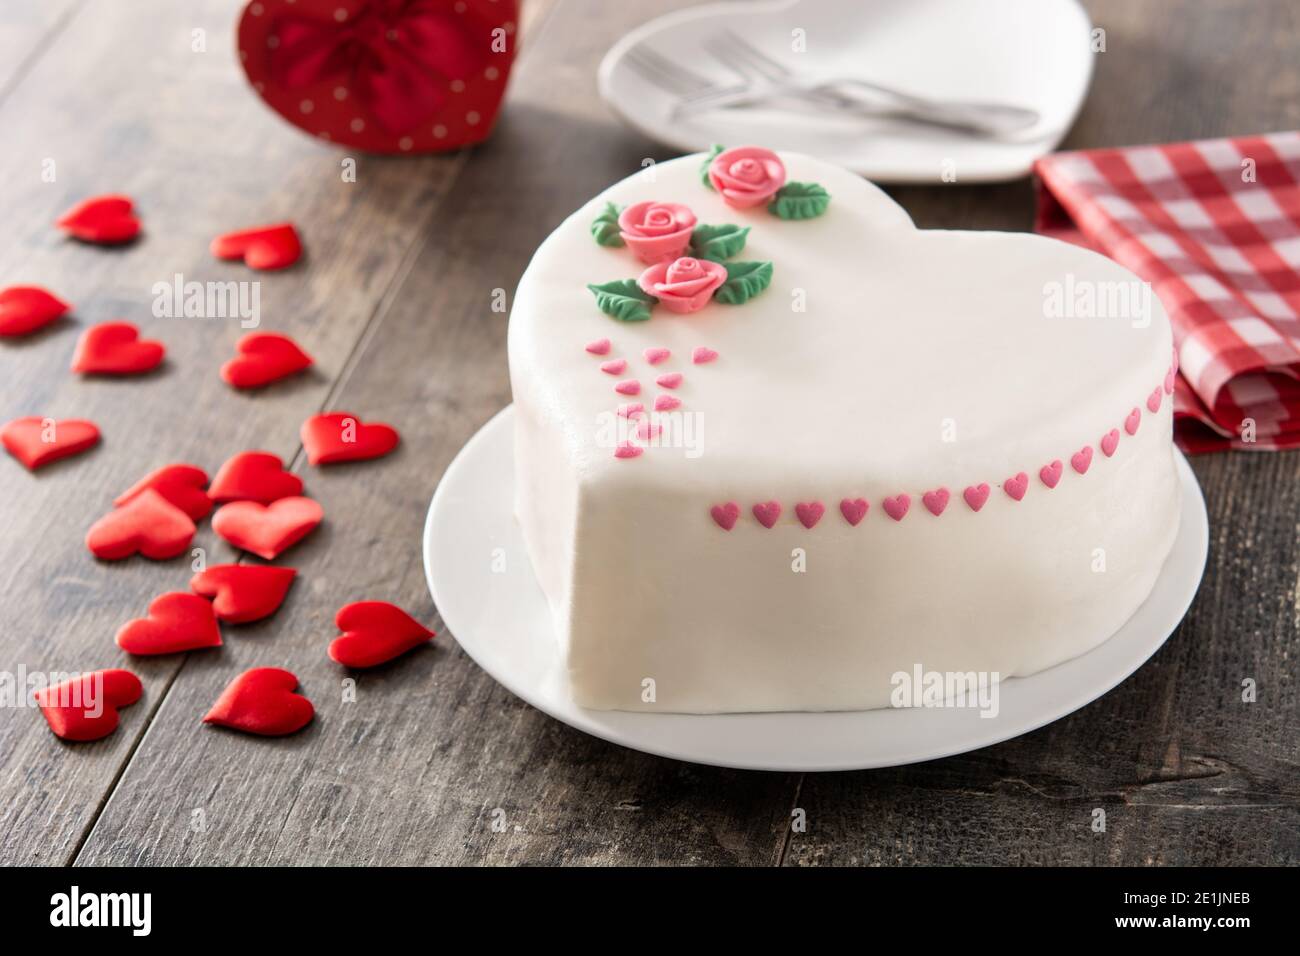 Heart cake for St. Valentine's Day, Mother's Day, or Birthday ...